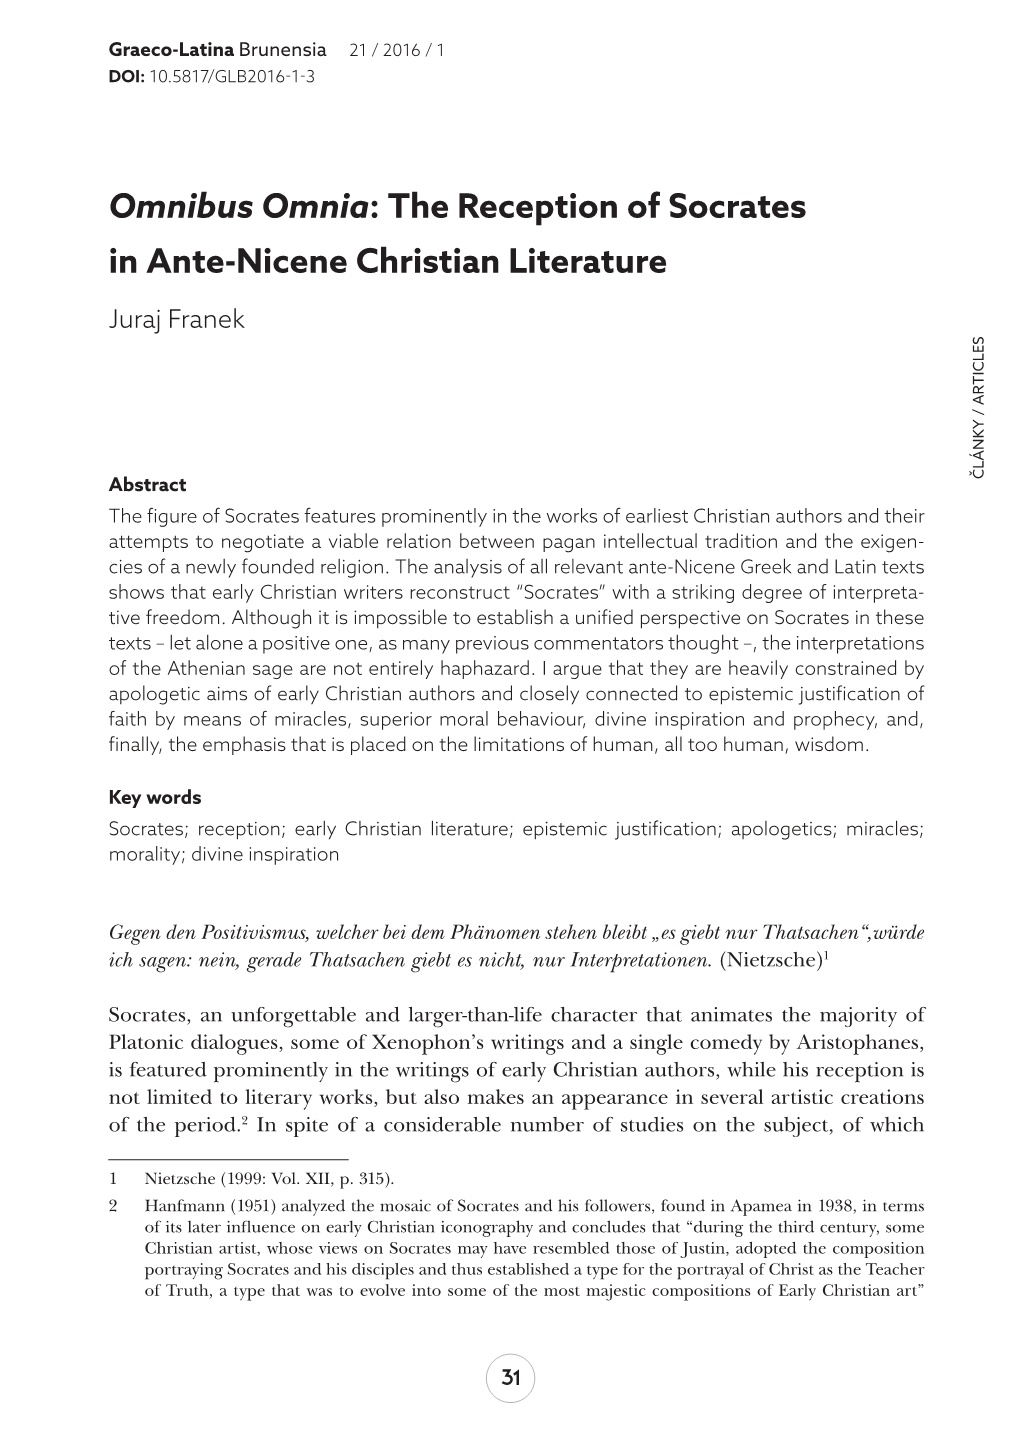 The Reception of Socrates in Ante-Nicene Christian Literature